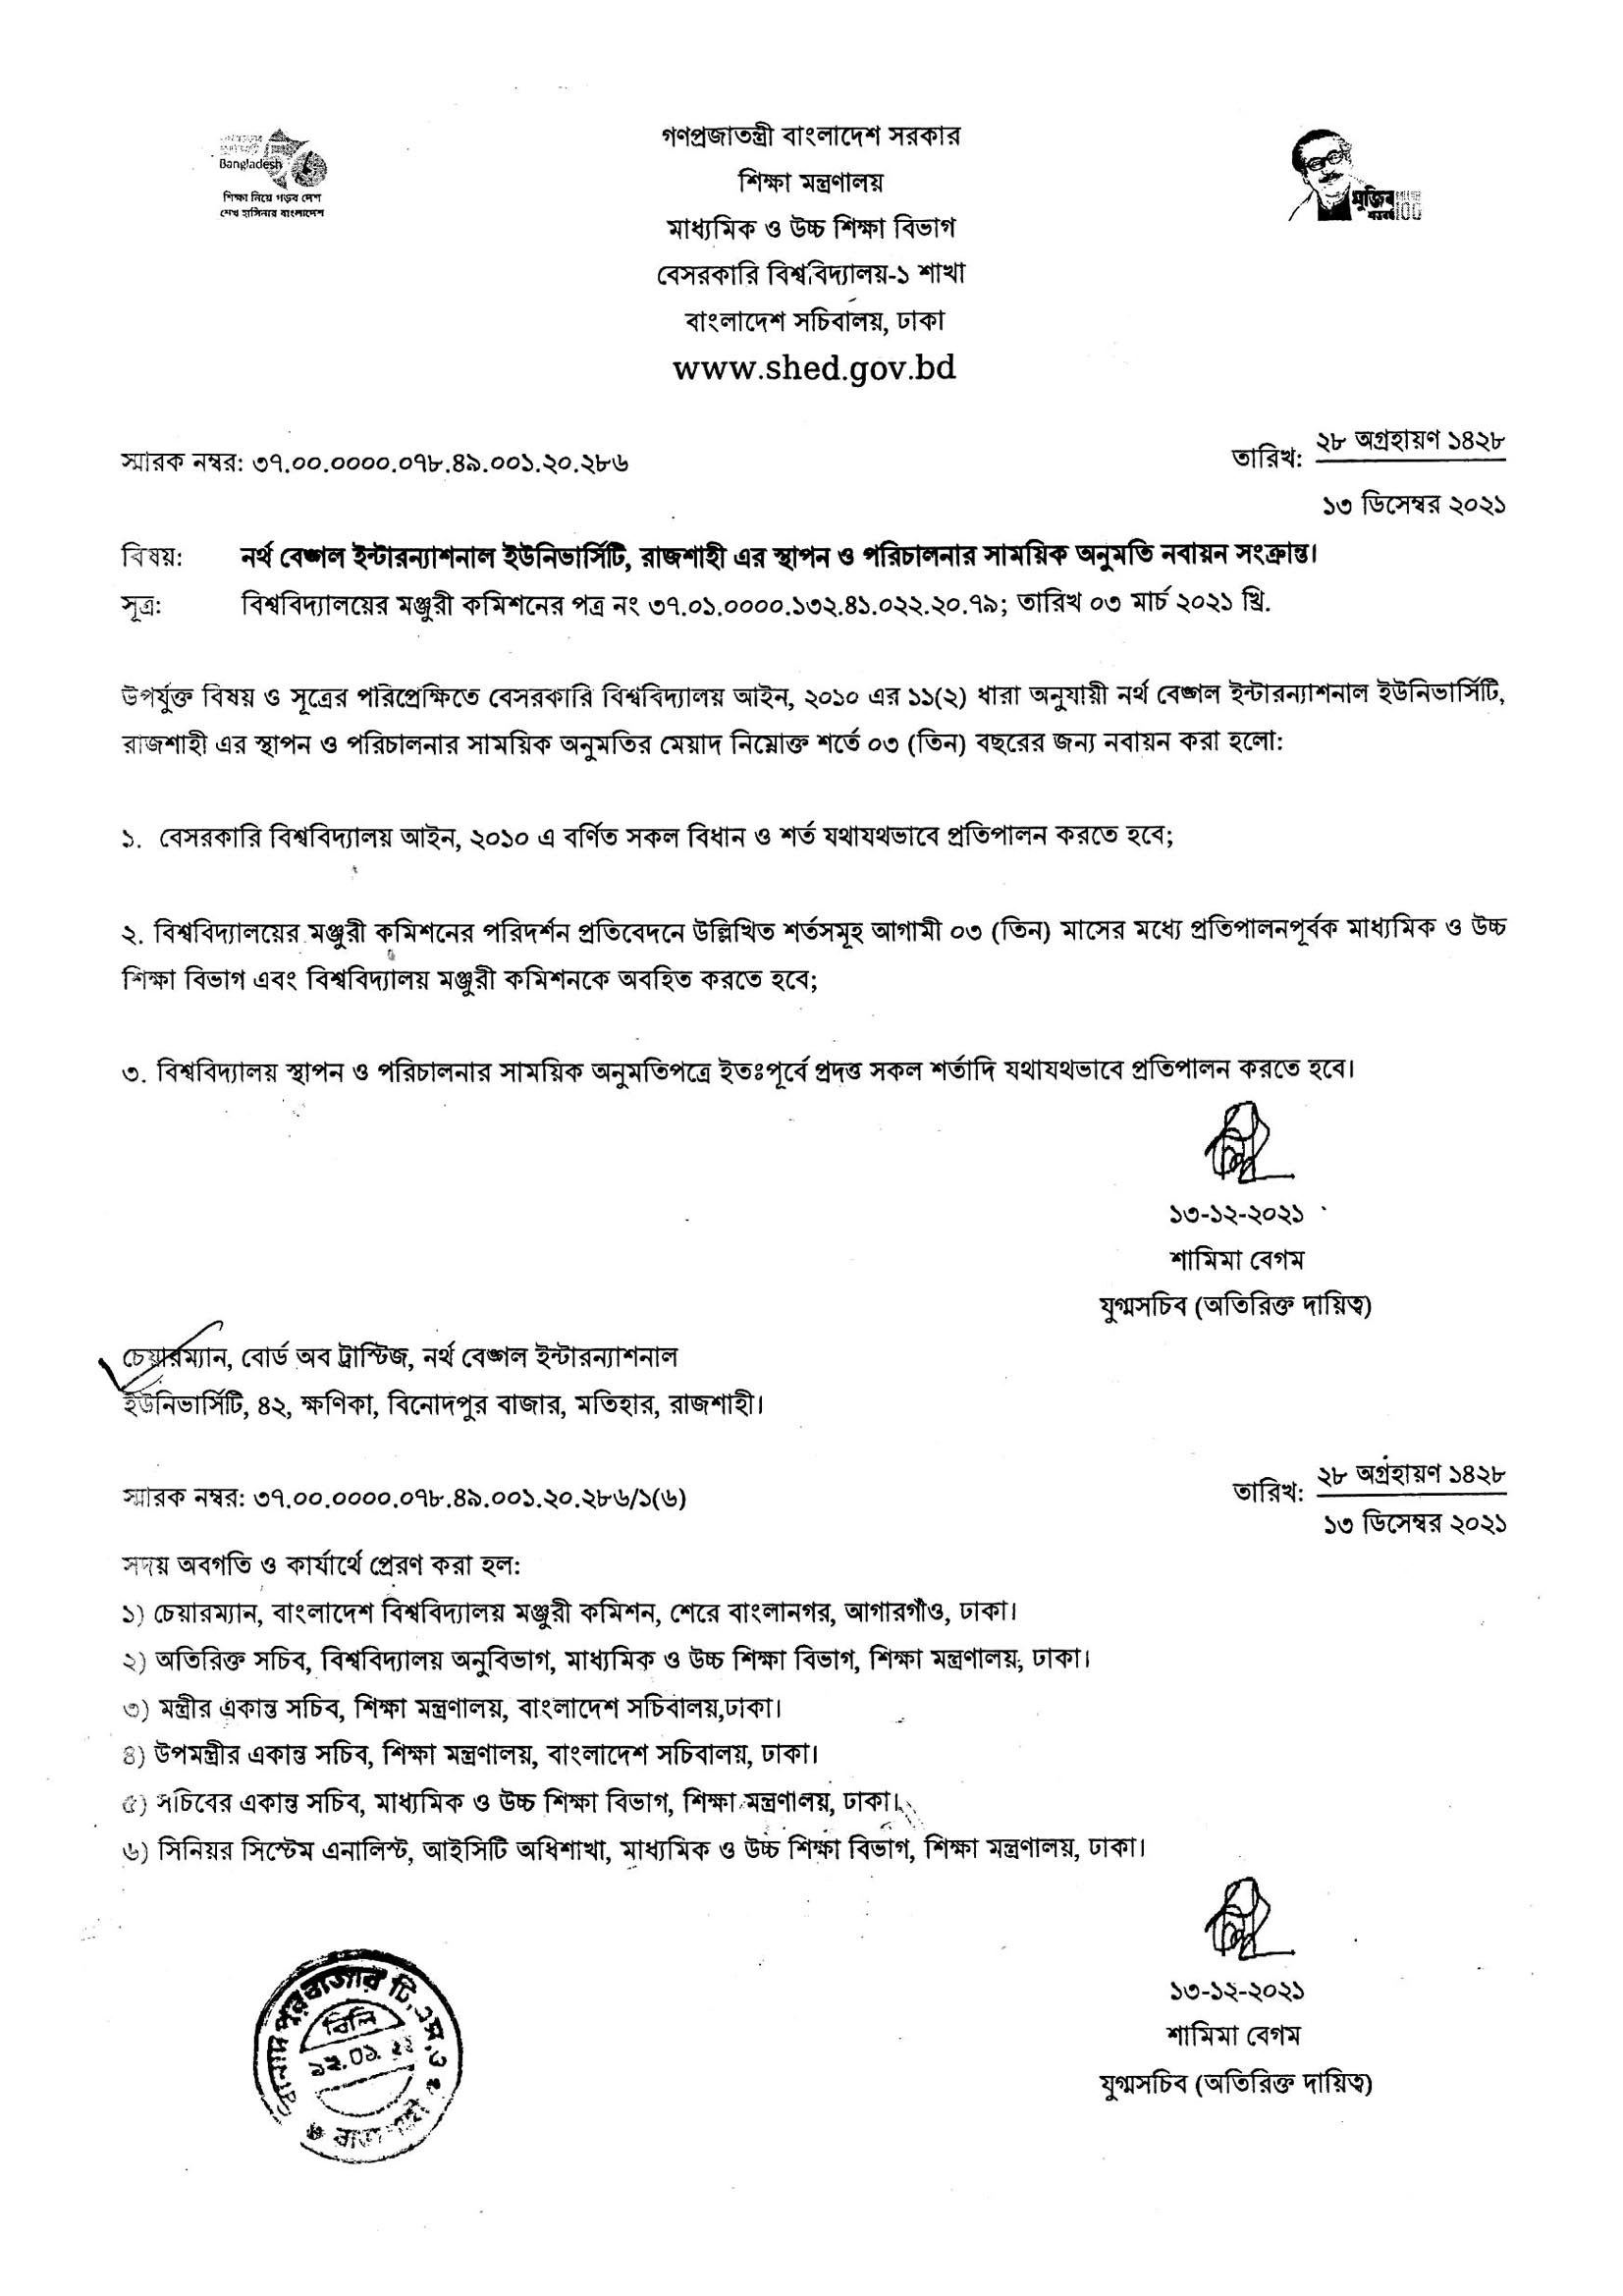 Government of the People's Republic of Bangladesh, Ministry of Education Approval Paper (Page-3)